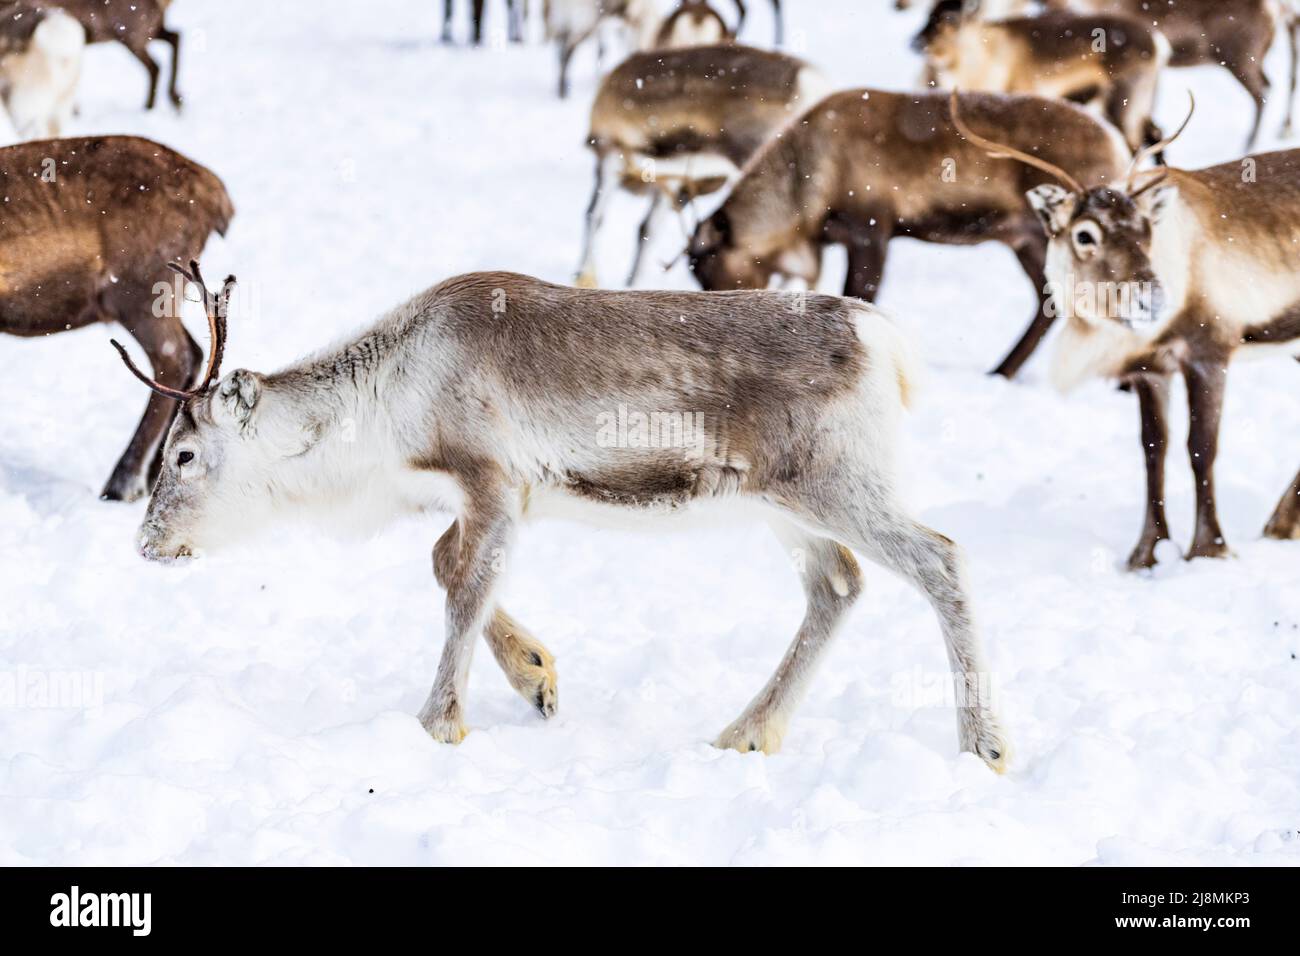 Young reindeer walking in the snow, Lapland, Sweden Stock Photo